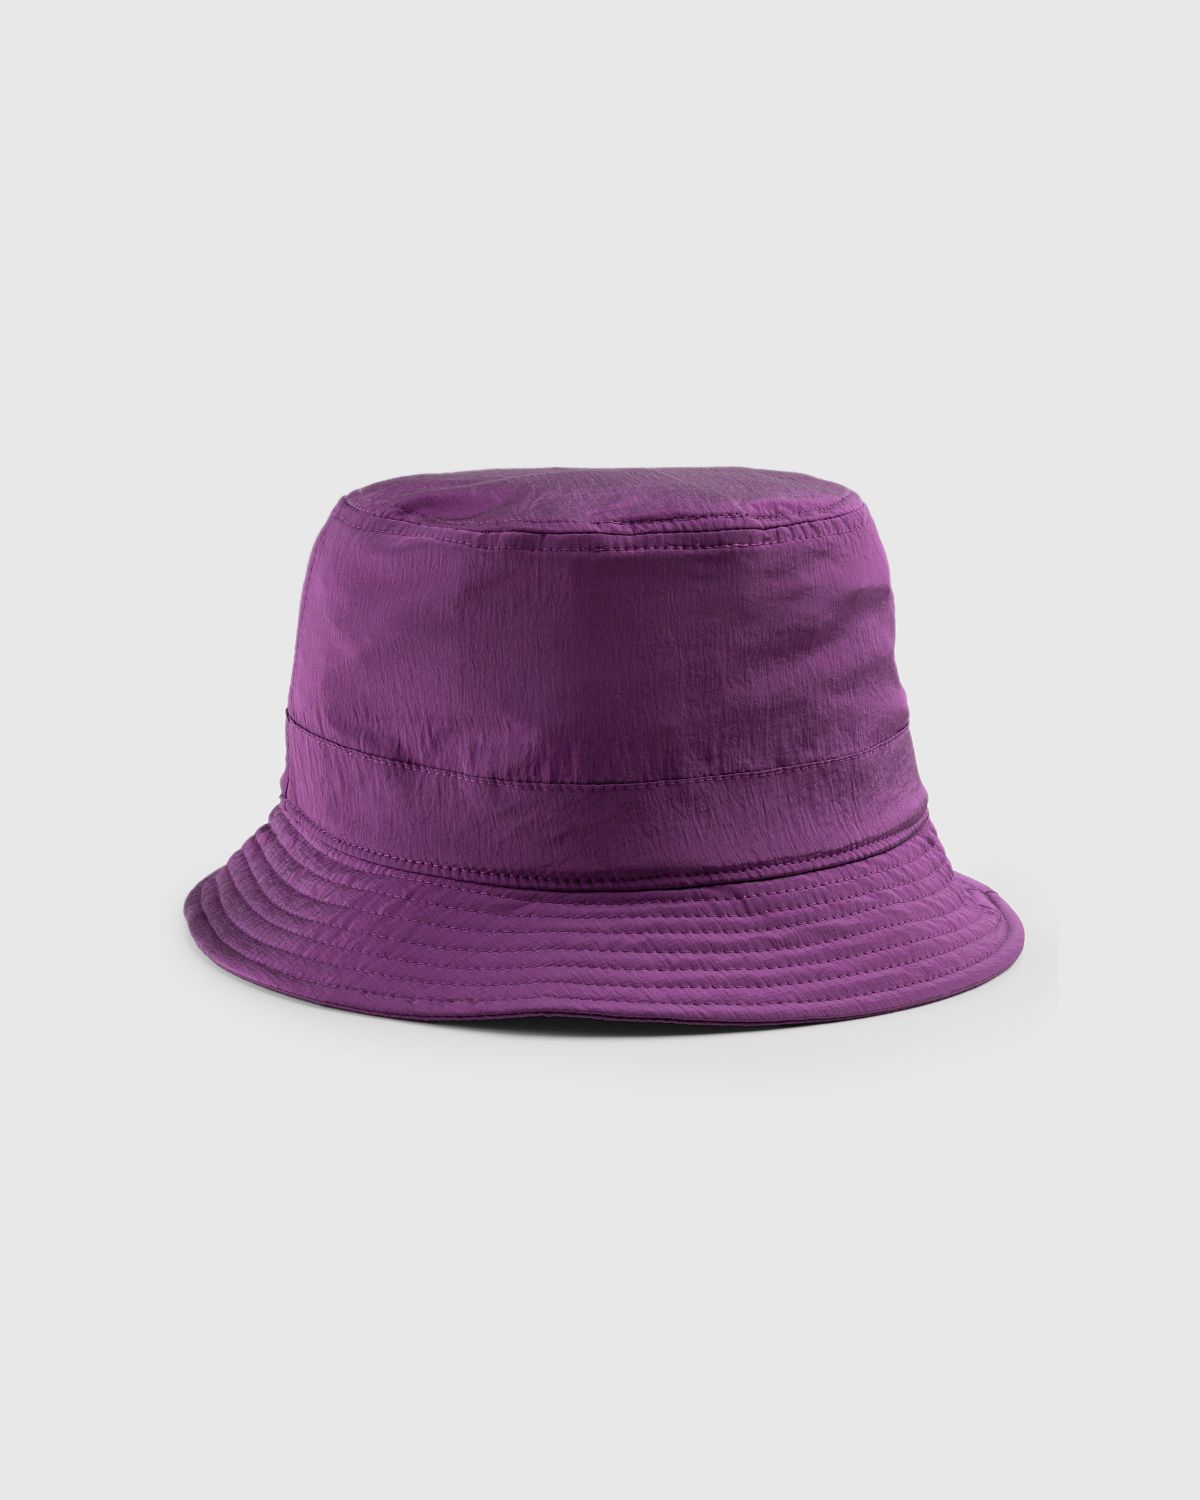 Stone Island – Cappello Pink 781599376 - Hats - Pink - Image 2